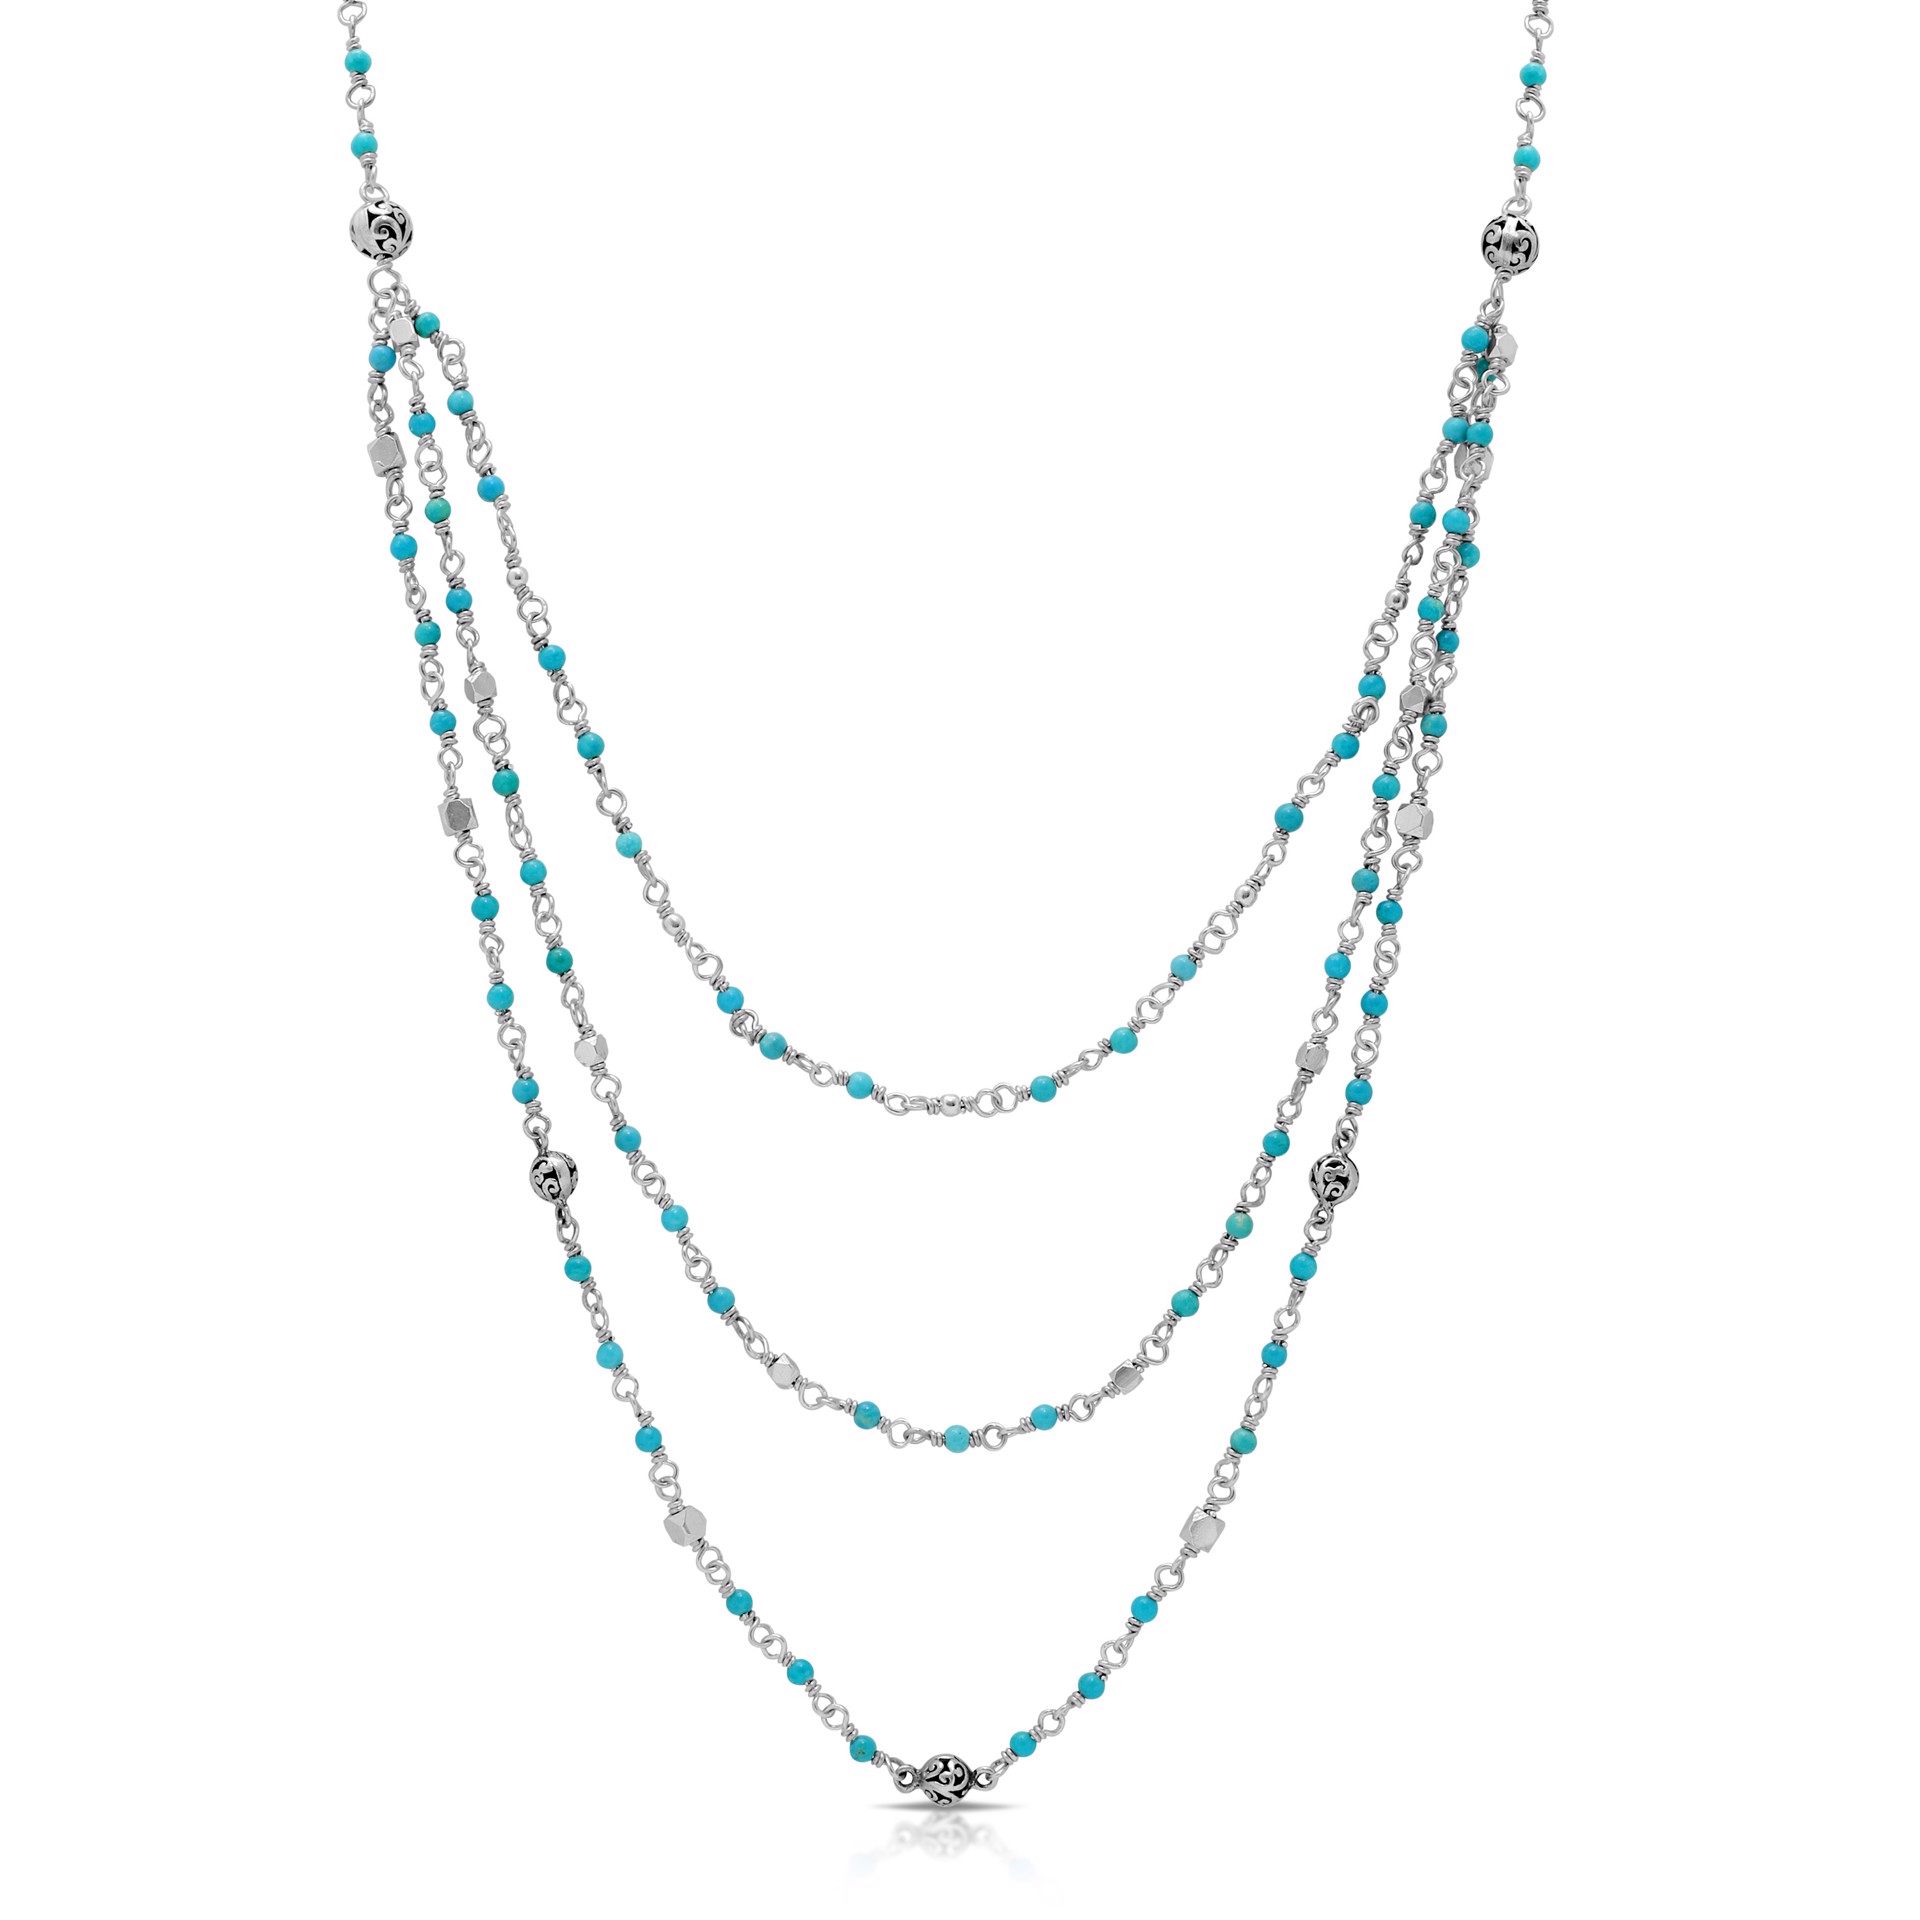 9650 Triple Strands Wire Wrapped Blue Turquoise Beads (2mm) Layered Necklace 16" by Lois Hill